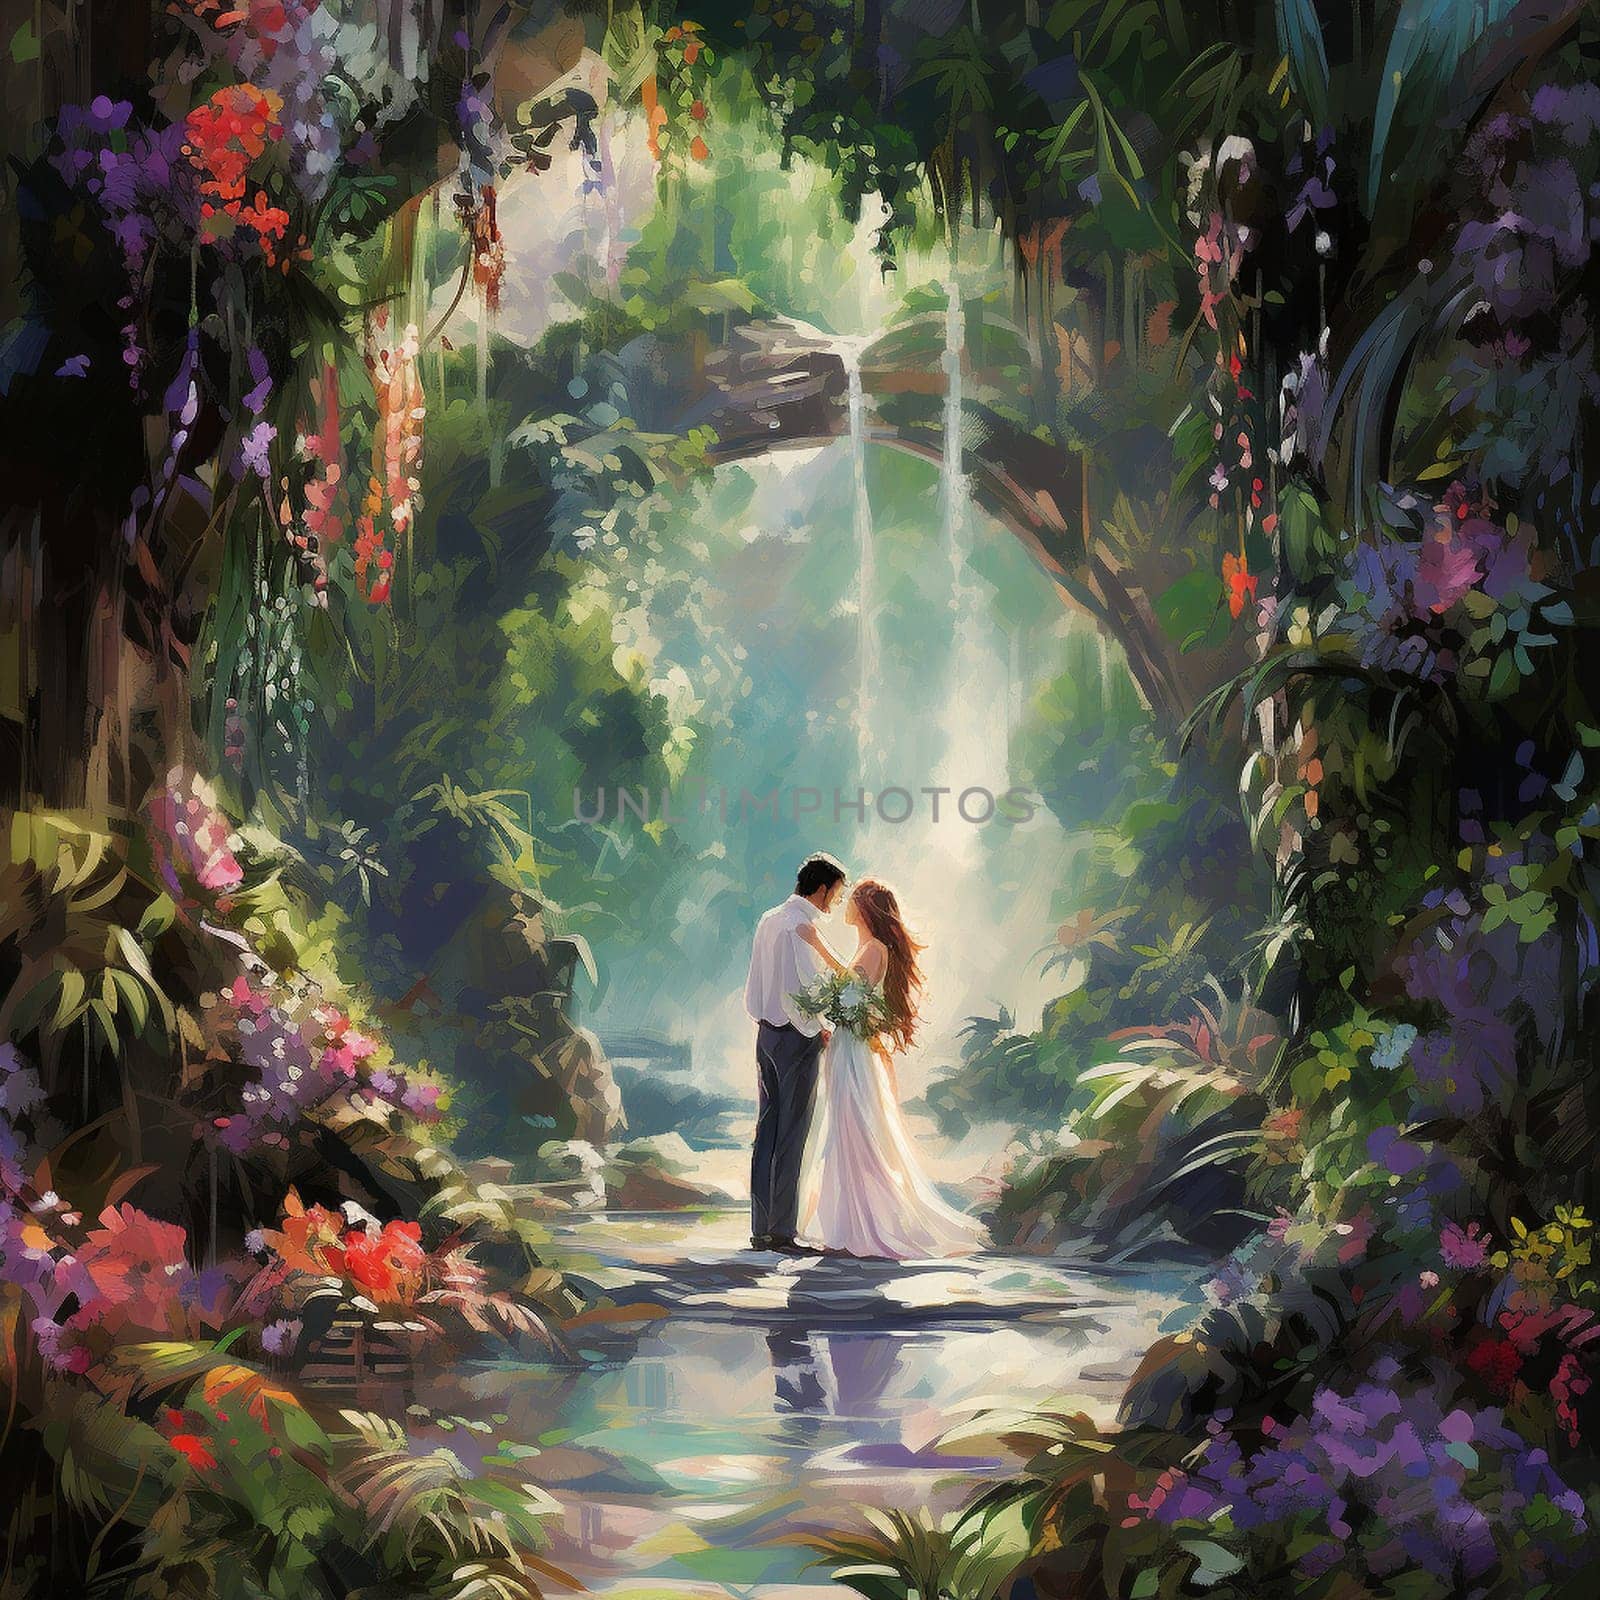 Immerse yourself in the enchanting scene of Emerald Oasis: Vows Exchanged in a Verdant Sanctuary. This impressionistic masterpiece captures the serenity and romance of a lush and vibrant sanctuary. The lush green foliage creates a verdant backdrop, while the cascading waterfall becomes the focal point of the image. Amidst the idyllic scenery, two individuals are seen exchanging wedding vows, their love celebrated in nature's embrace. Blooming flowers and shimmering butterflies add an ethereal touch to the atmosphere, evoking a sense of tranquility and enchantment. Let this captivating image transport you to a world of natural beauty and everlasting love.